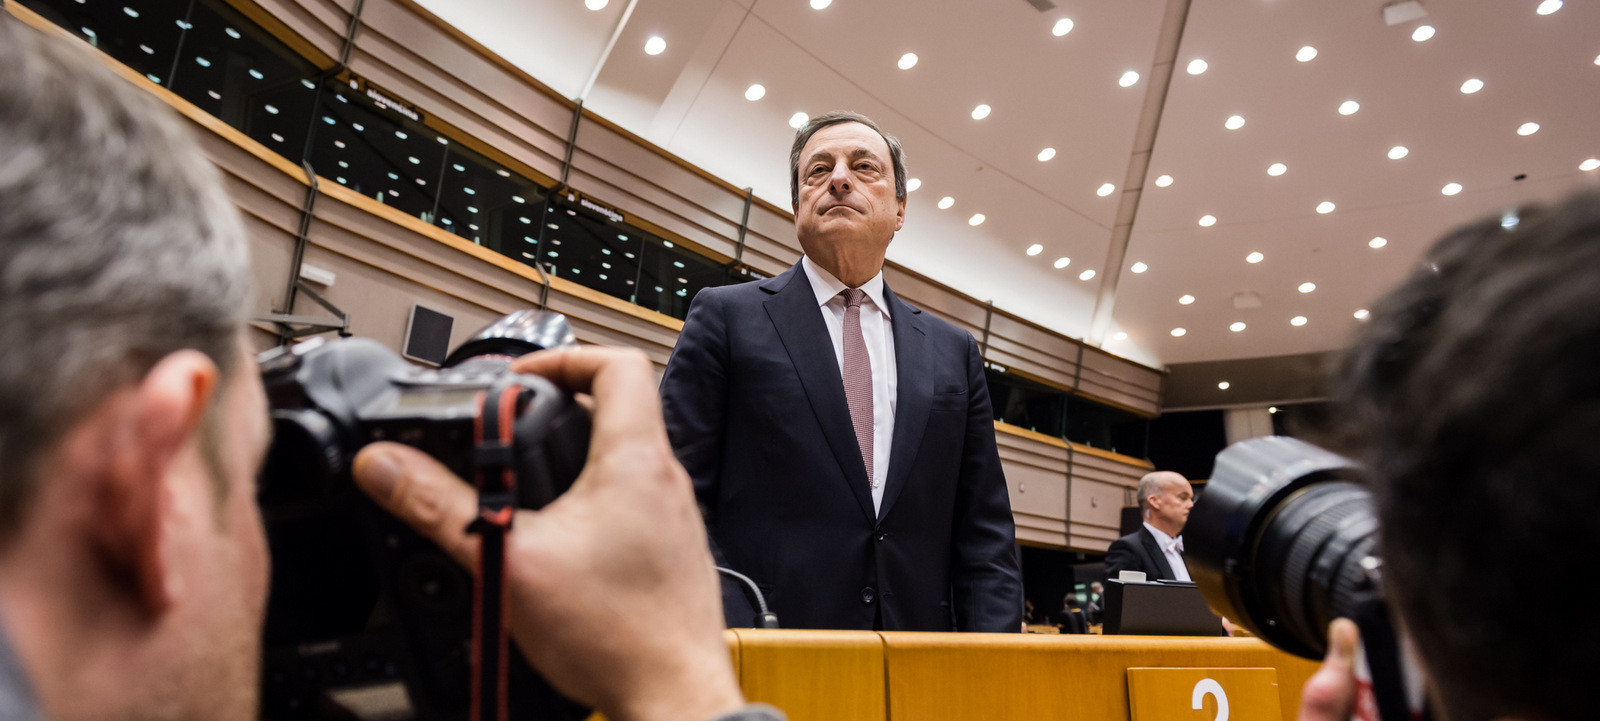 European Central Bank Governor Mario Dragh arrives for a plenary session at the European Parliament in Brussels, Feb. 25, 2015. (AP/Geert Vanden Wijngaert)